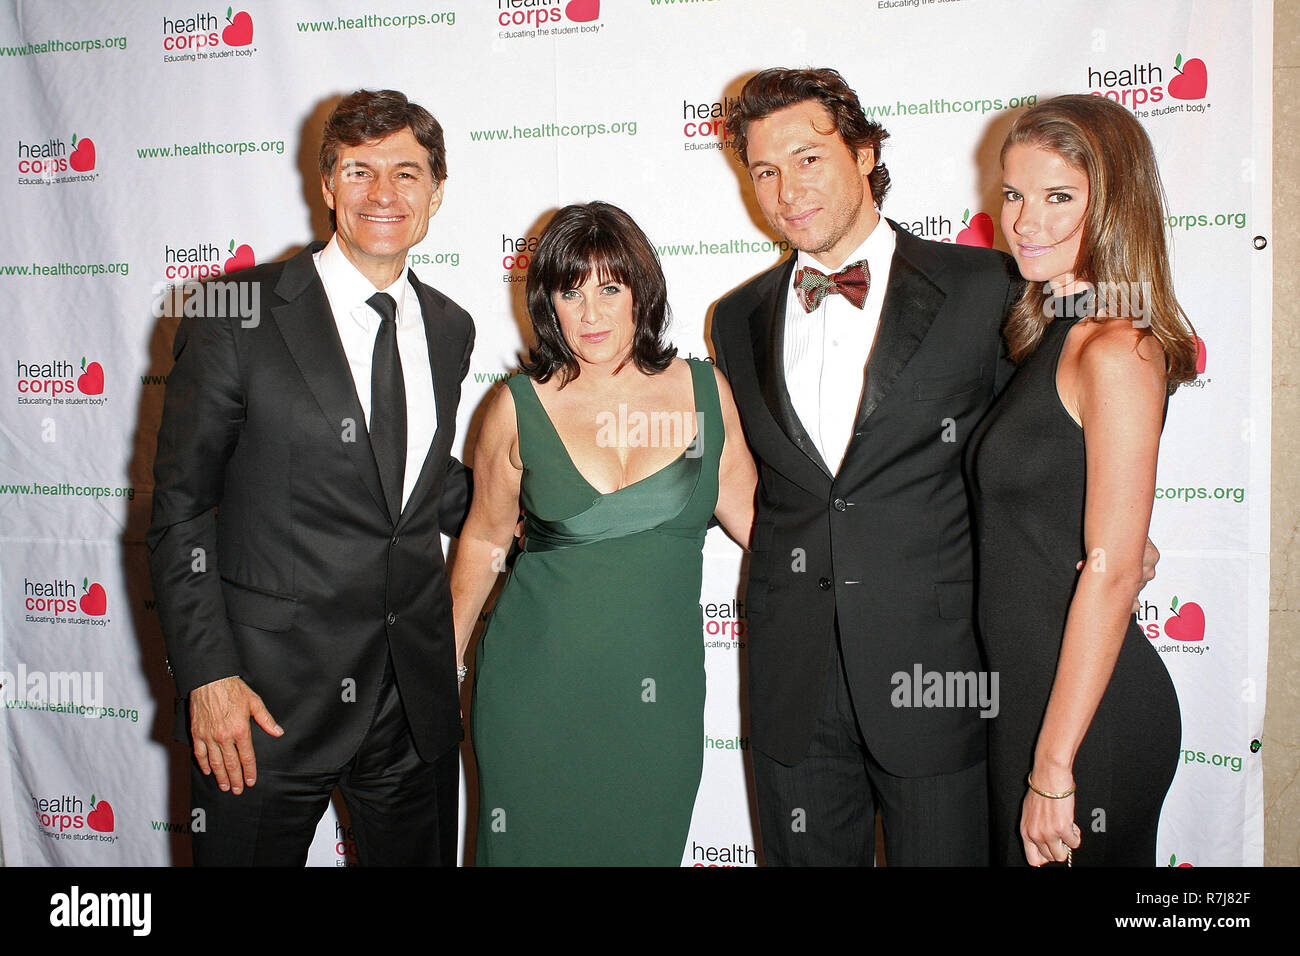 NEW YORK - APRIL 30:  Dr. Mehmet Oz, Lisa Oz, Chef Rocco DiSpirito and Nicola Mar attend the 2009 Green Garden Gala at The Winter Garden inside the World Financial Center on April 30, 2009 in New York City.  (Photo by Steve Mack/S.D. Mack Pictures) Stock Photo